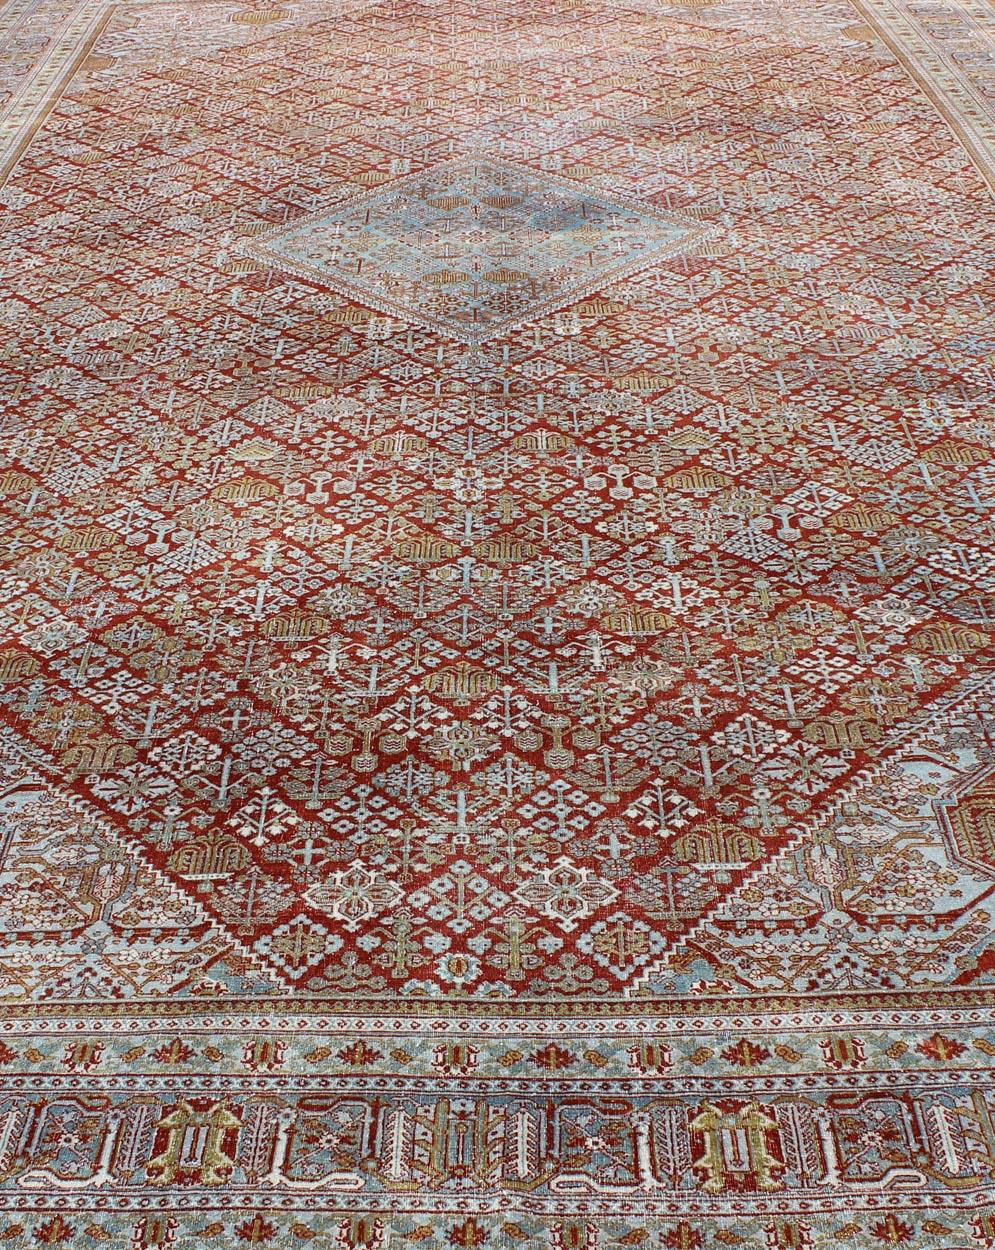 Large Antique Persian Joshegan Rug in Rust Red, Light Blue, Green, Gold & Olive In Good Condition For Sale In Atlanta, GA